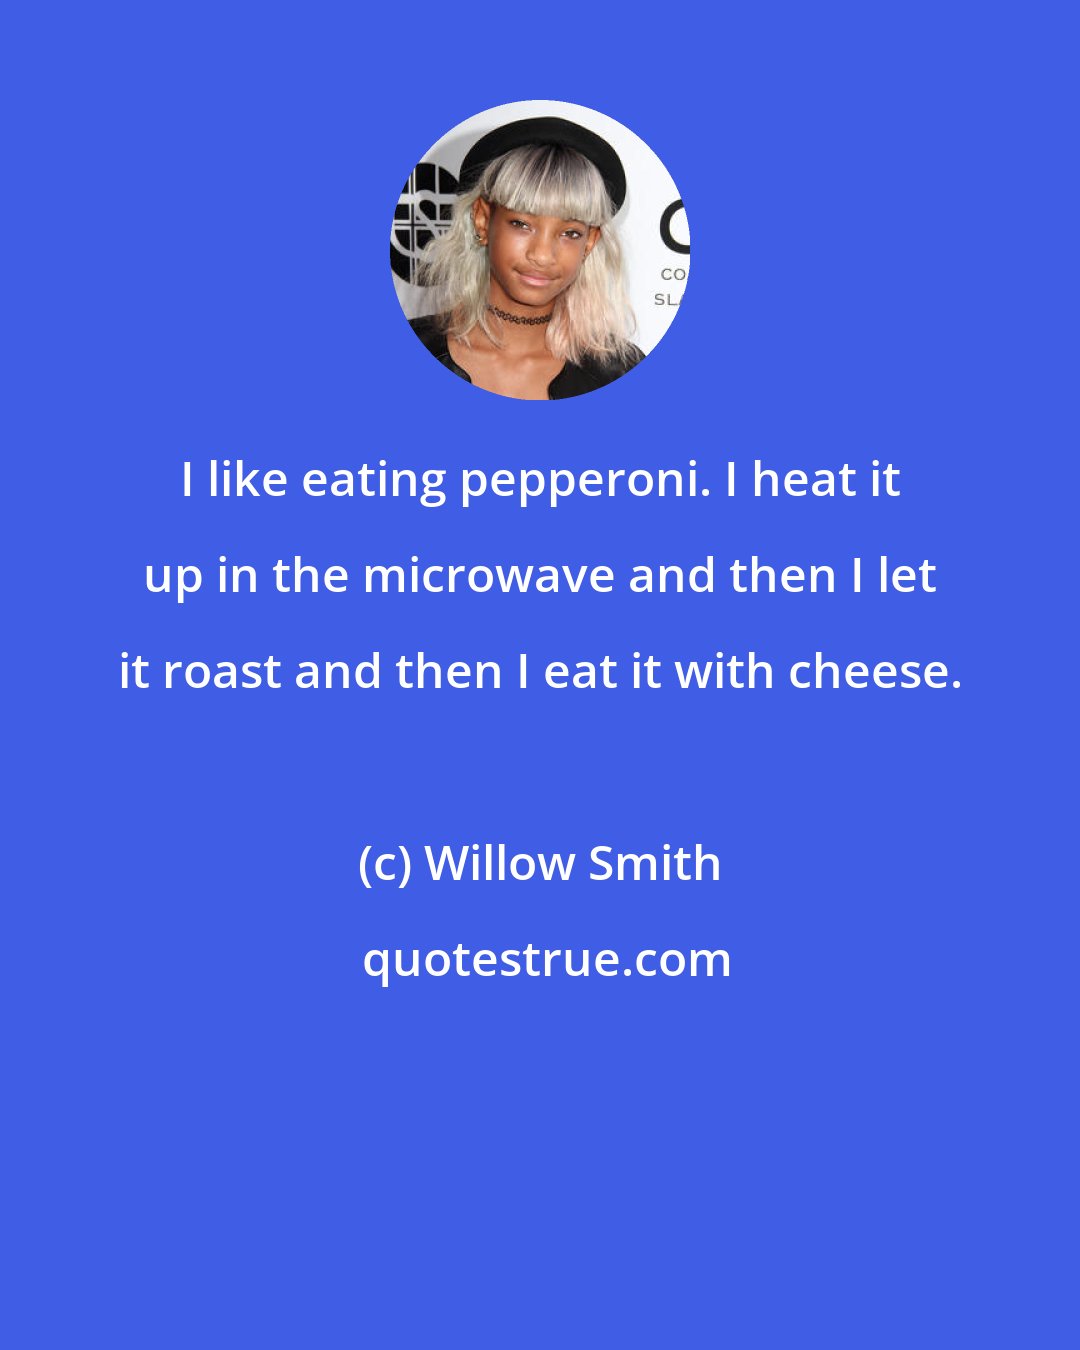 Willow Smith: I like eating pepperoni. I heat it up in the microwave and then I let it roast and then I eat it with cheese.